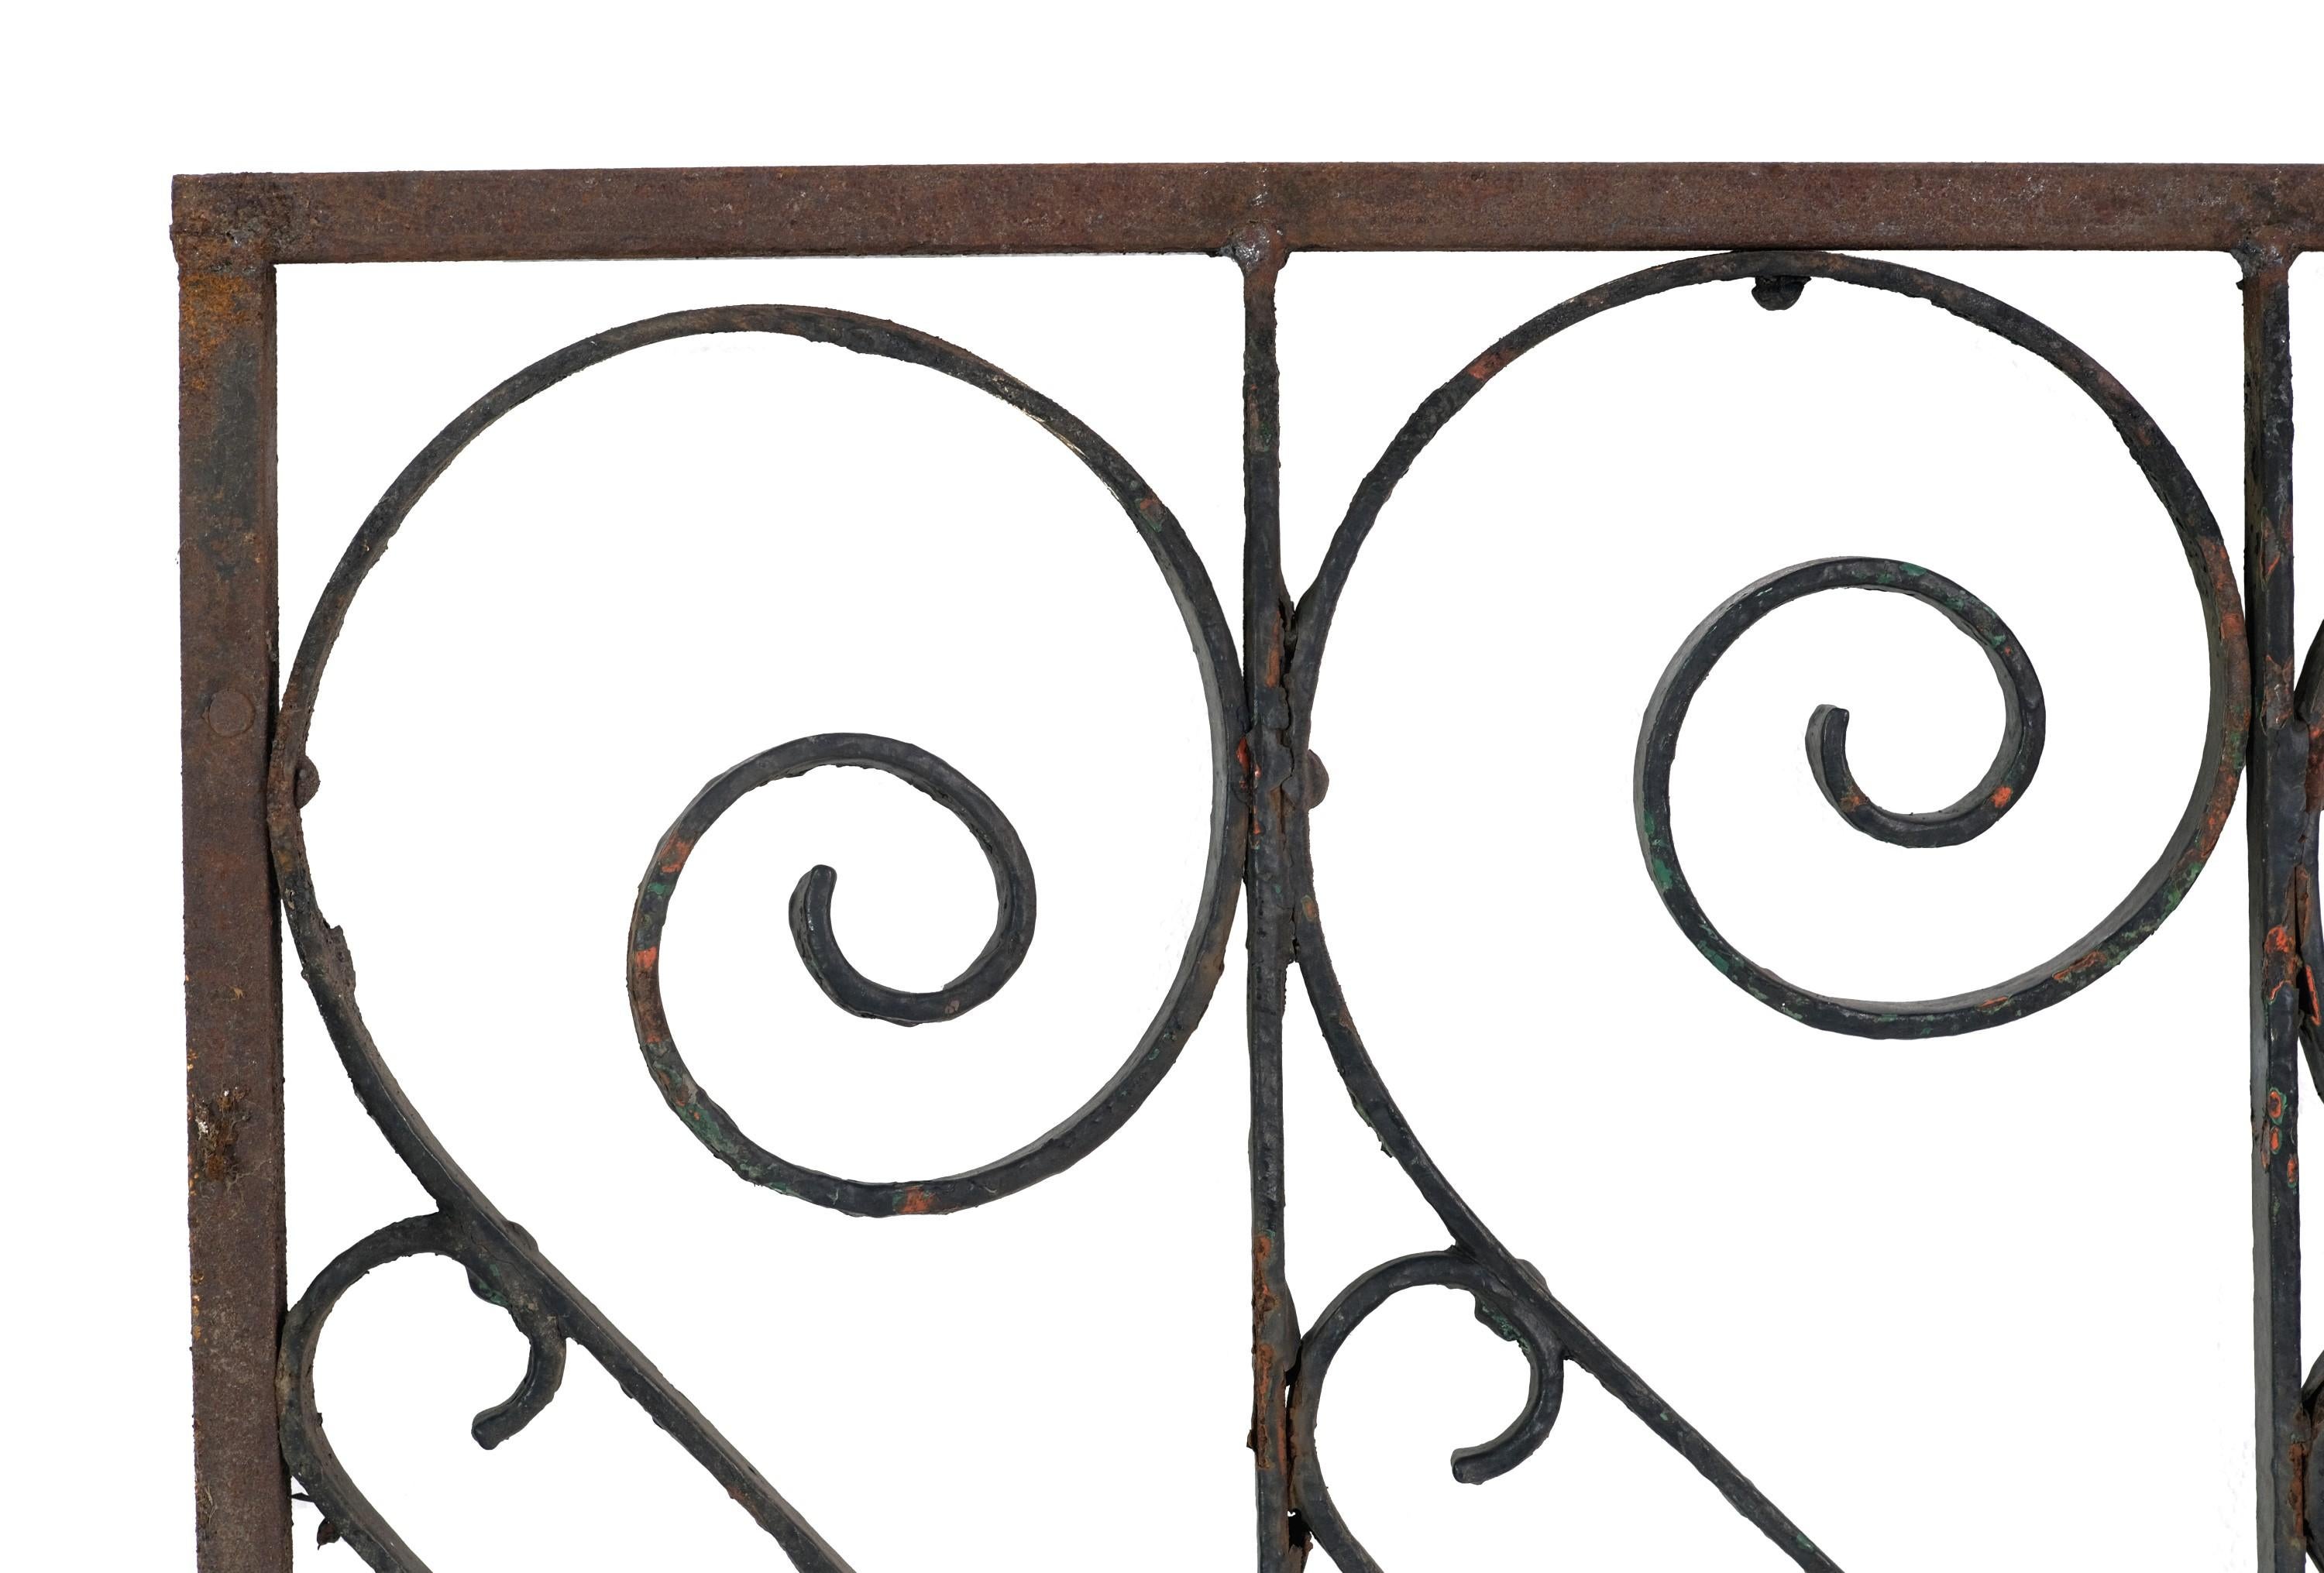 Antique decorative square wrought iron panel with S curves and spirals. It is painted black; the details are in very good condition. There is some rust from age and use. Please note, this item is located in our Scranton, PA location.